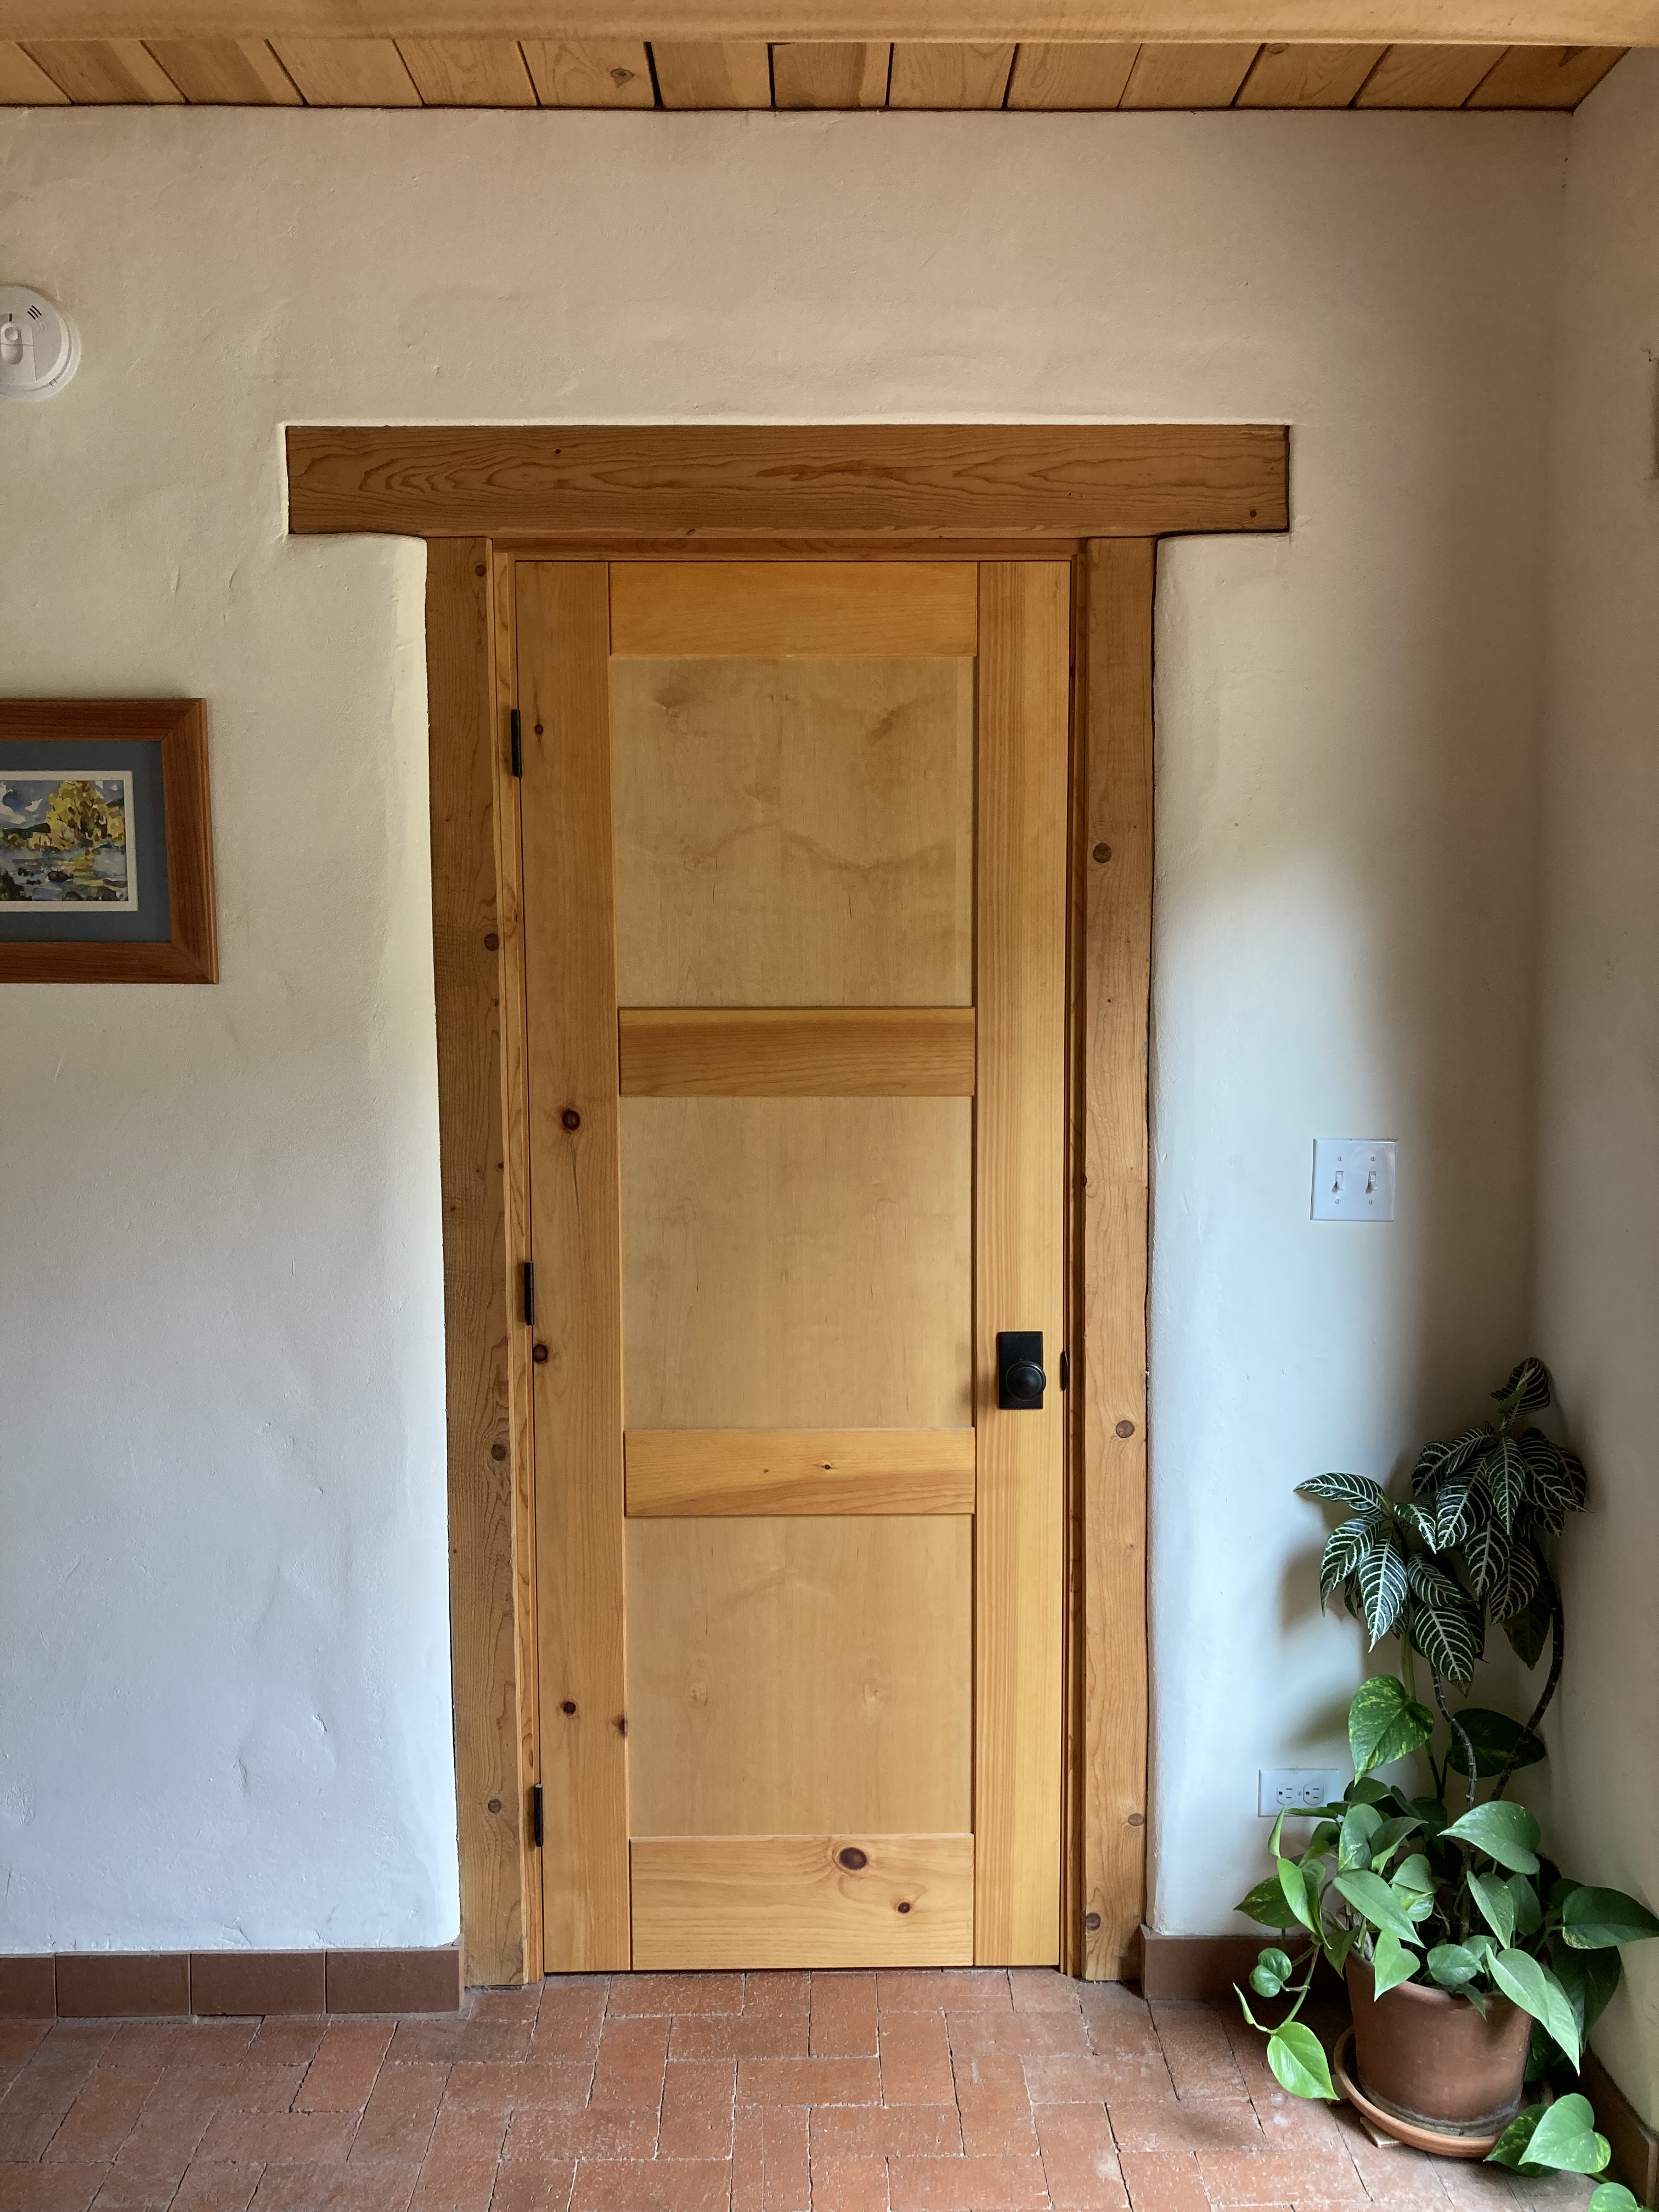 Interior custom doors in clean, New Mexican style